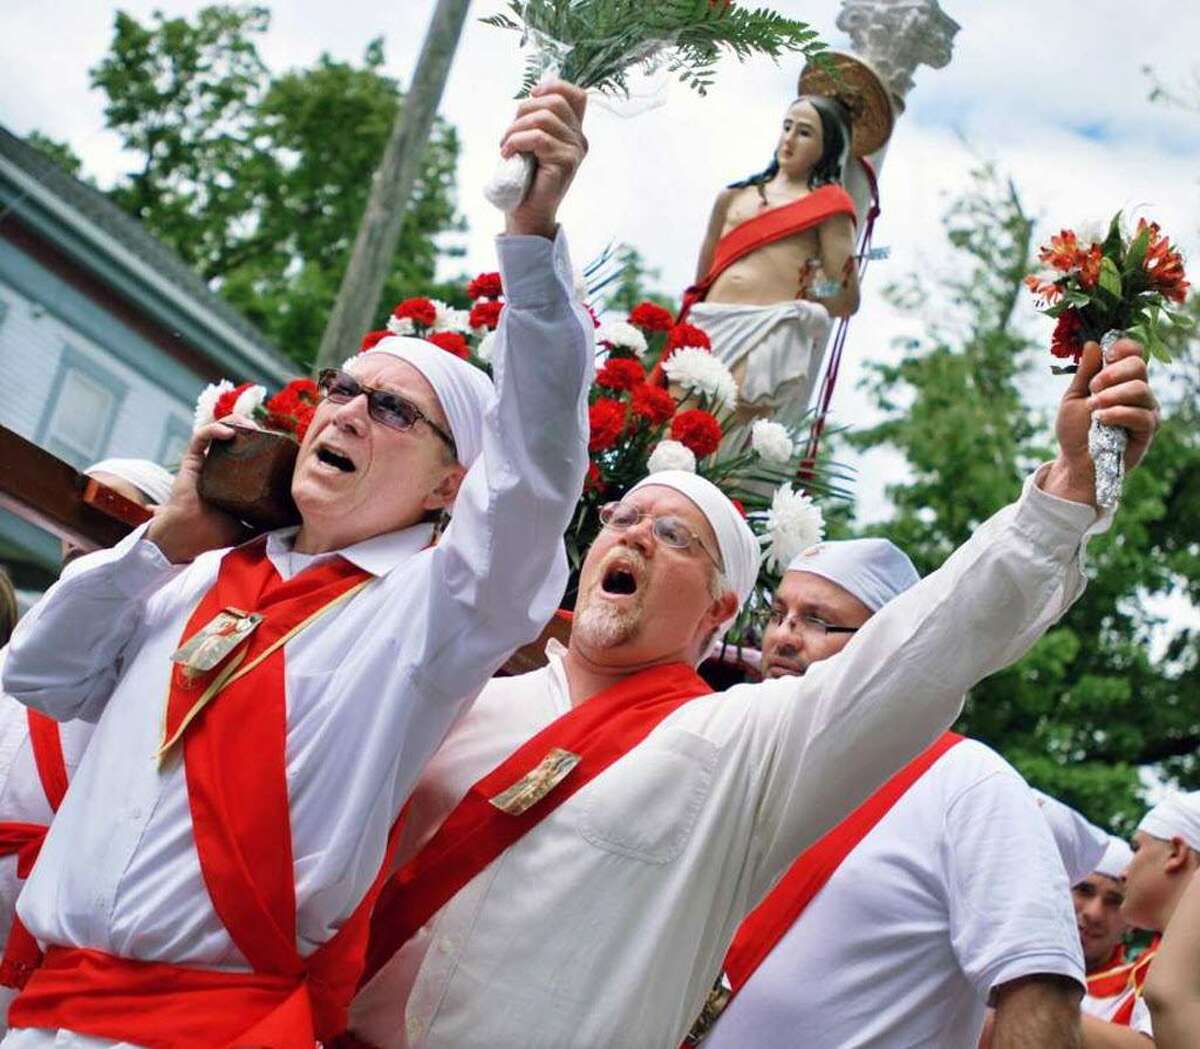 For nearly 100 years, the Feast of St. Sebastian has been celebrated in Middletown at the Roman Catholic Church on Washington Street. On Sunday, participants, barefoot and dressed in white with red sashes and carrying carnations, make their way to the church from the cemetery on Route 66 in Middlefield and the Italian Society on Court Street.